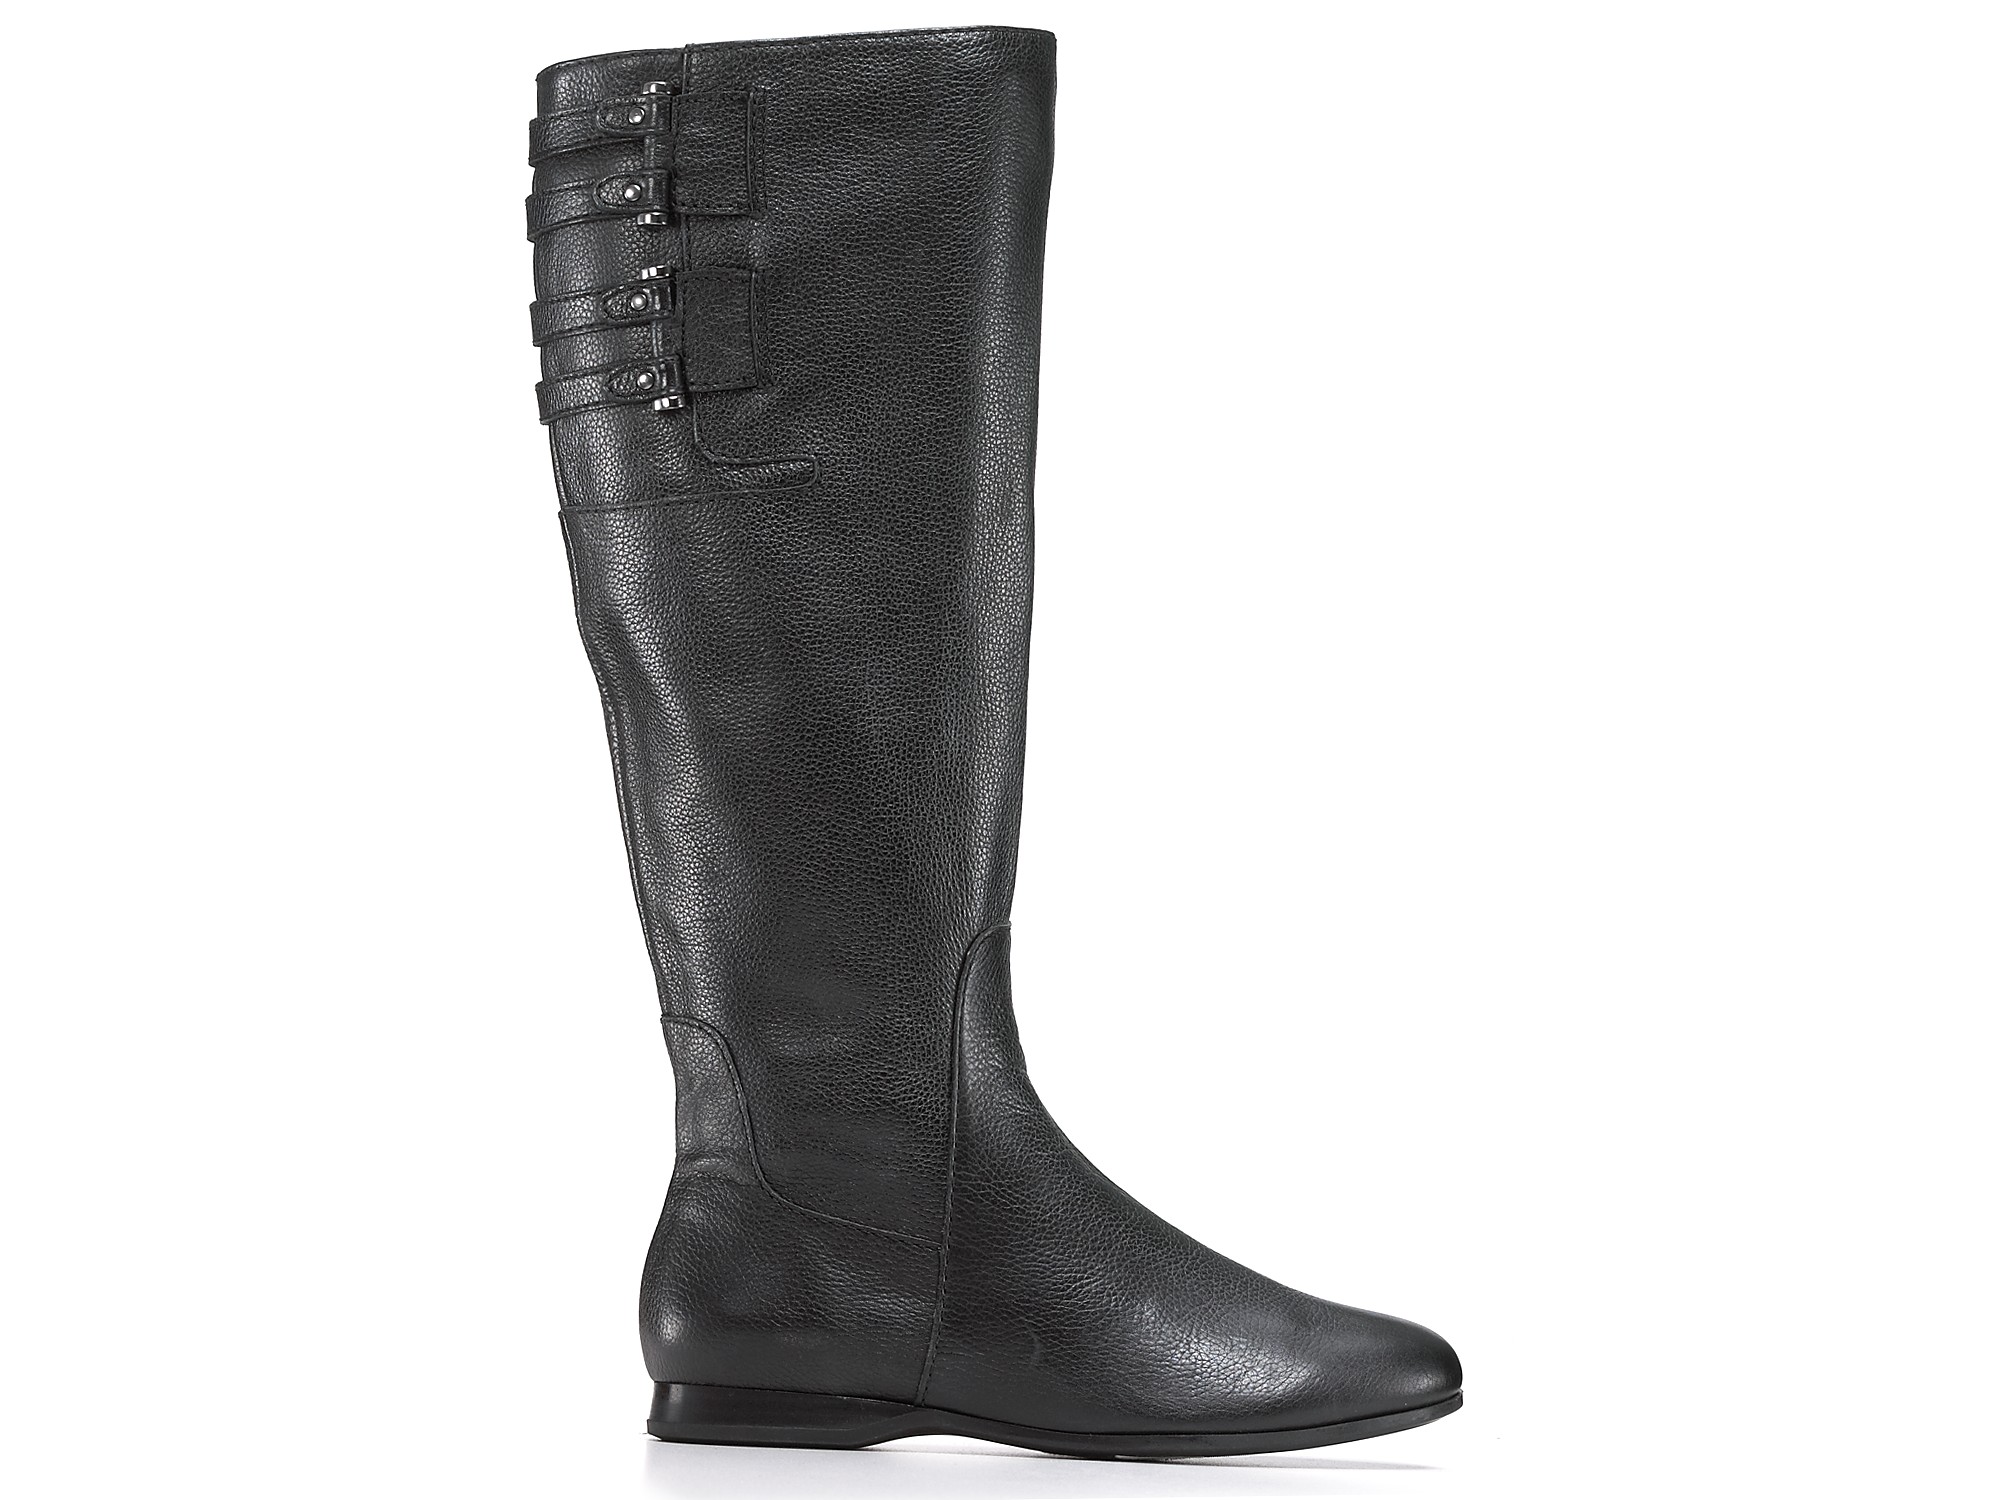 Lyst - Enzo angiolini Boots - Zapata Flat in Black